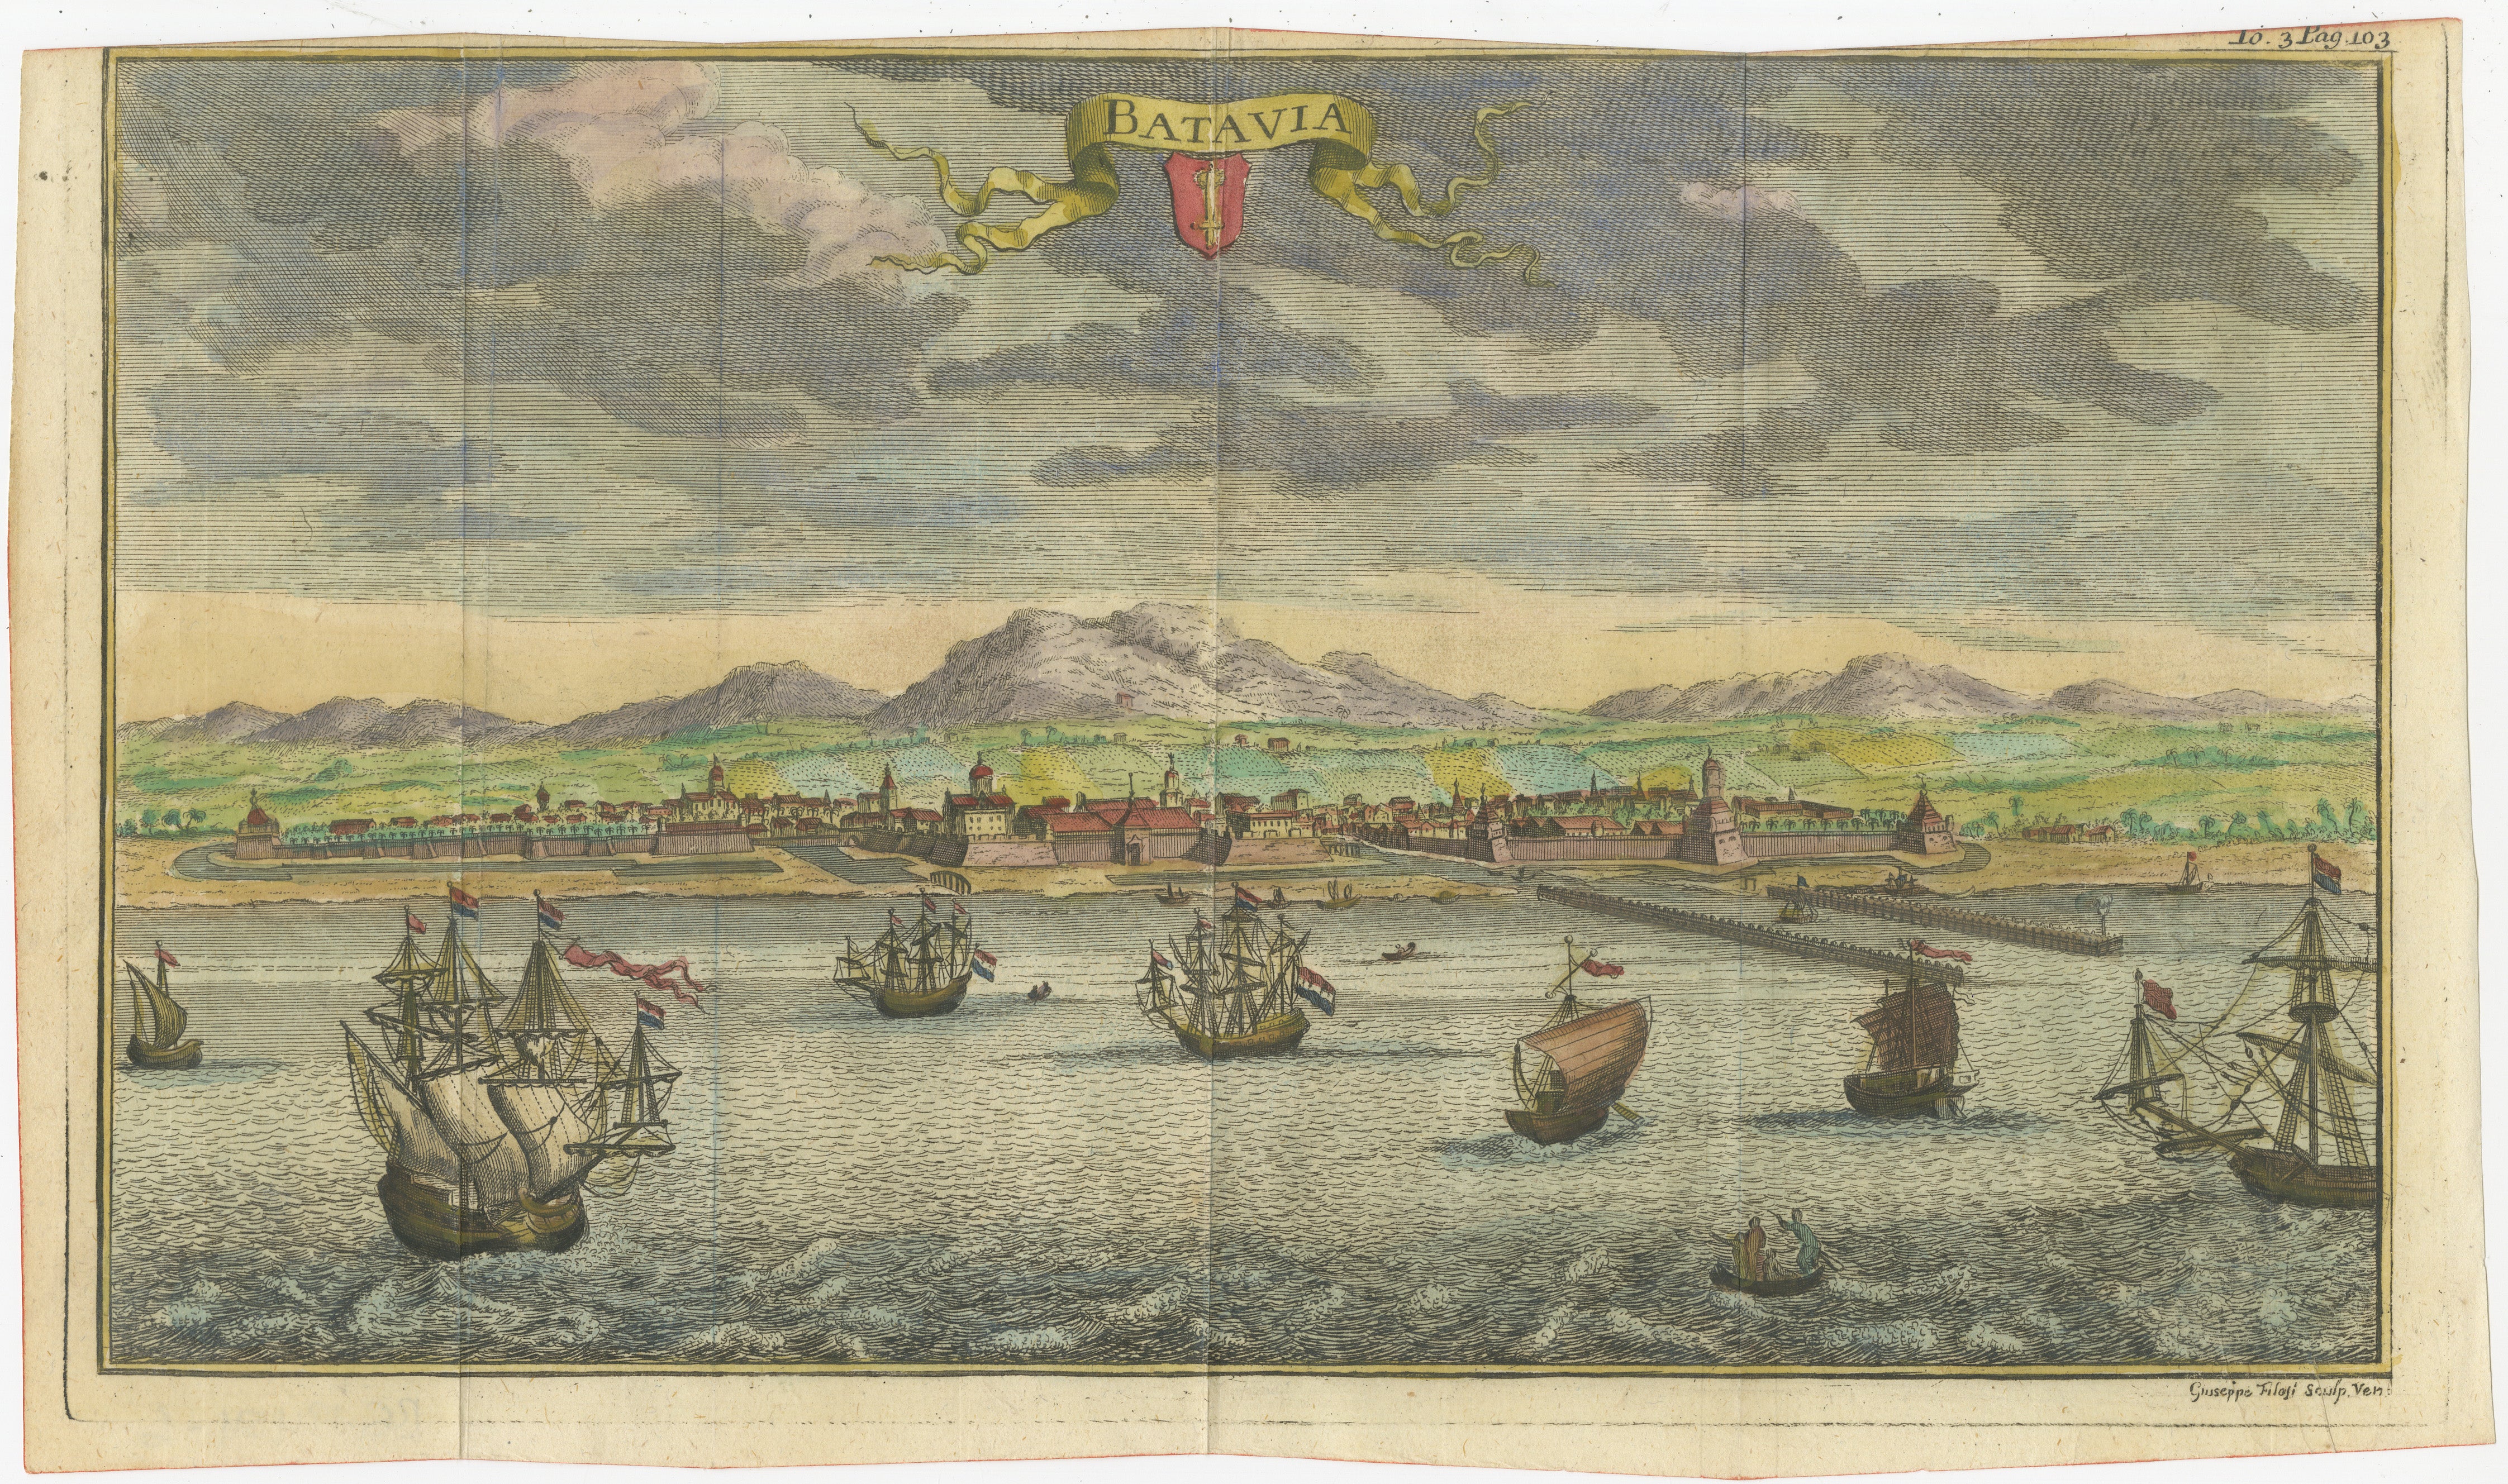 A historical print depicting the city of Batavia (present-day Jakarta during the Dutch colonial period). The view is from the sea, looking towards the city. The skyline is dominated by European-style buildings, indicative of colonial architecture,